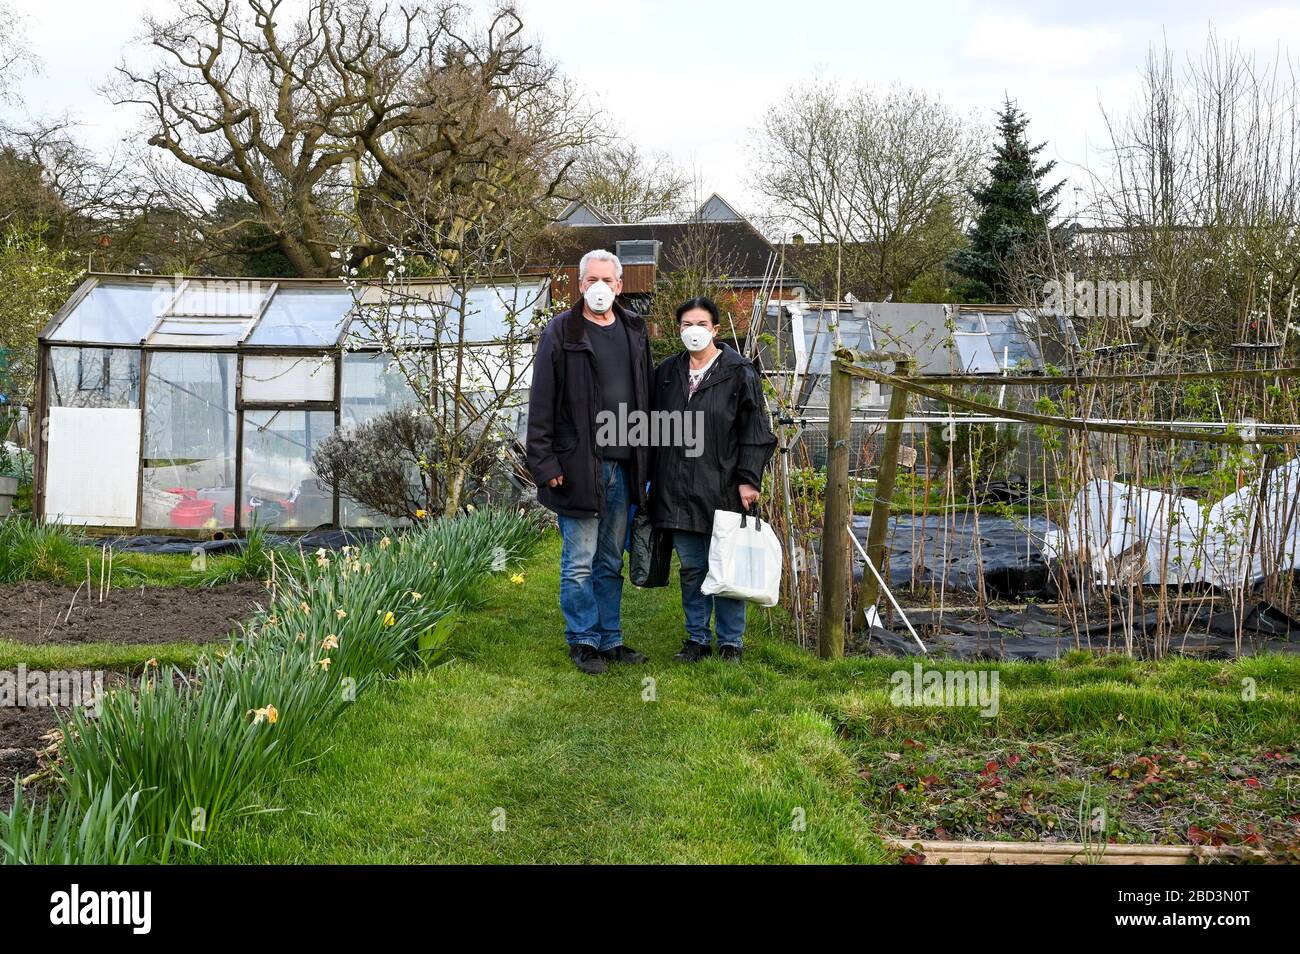 An older married couple wear masks when arriving at an allotment garden during the covid-19 coronavirus pandemic. Stock Photo